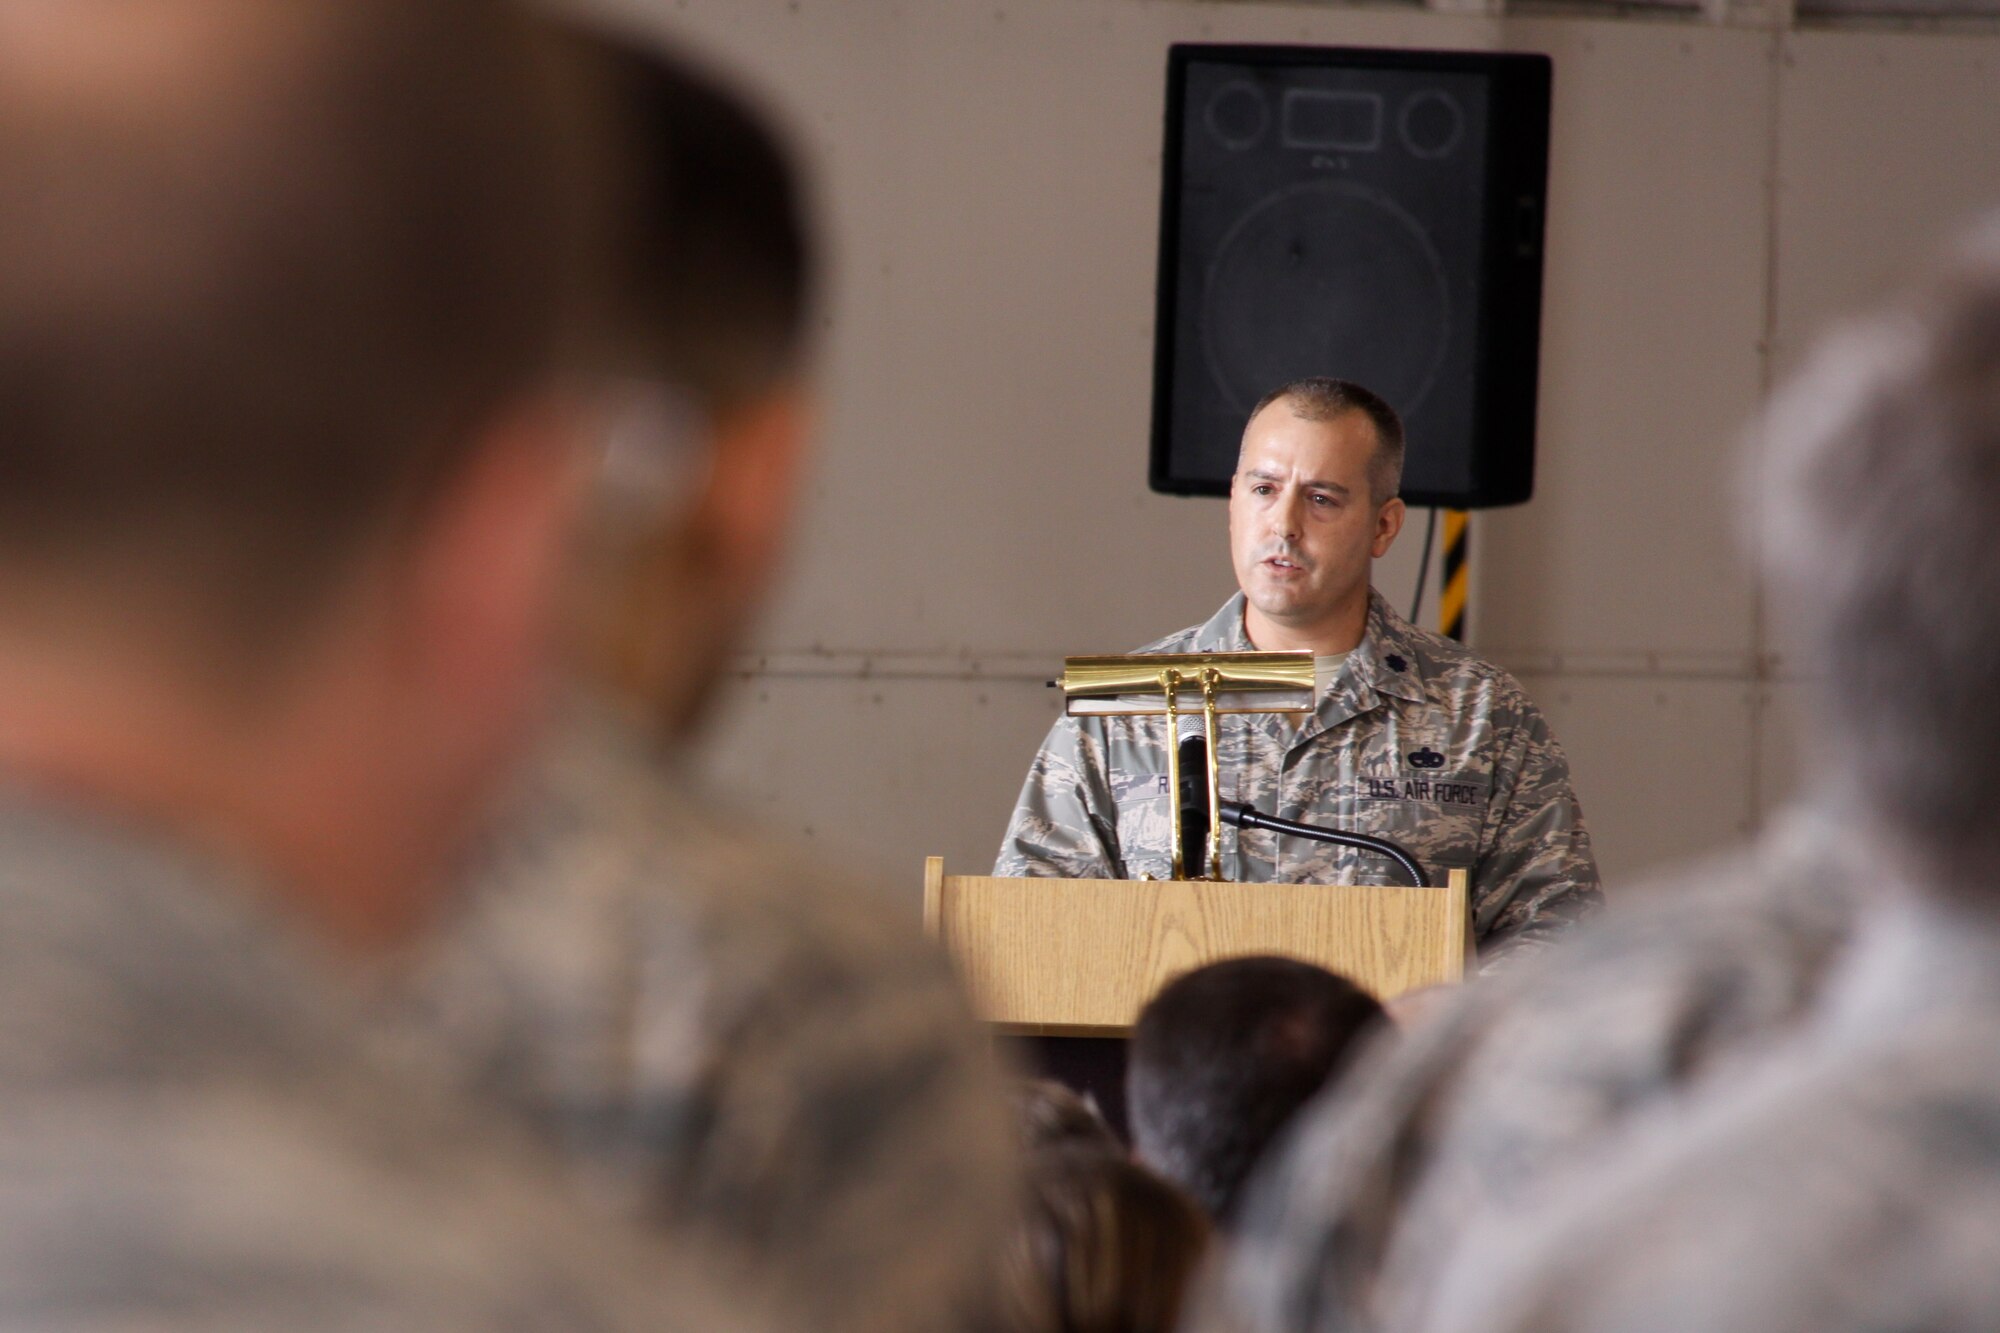 Lt. Col. Michael Reid, commander of the 482nd Maintenance Group, gives a speech on the accomplishments and dedication of service of fallen colleague and friend, Lt. Col. Edmundo Velazquez on Dec. 5, 2009. (U.S. Air Force photo/Tech. Sgt. Lionel Castellano)